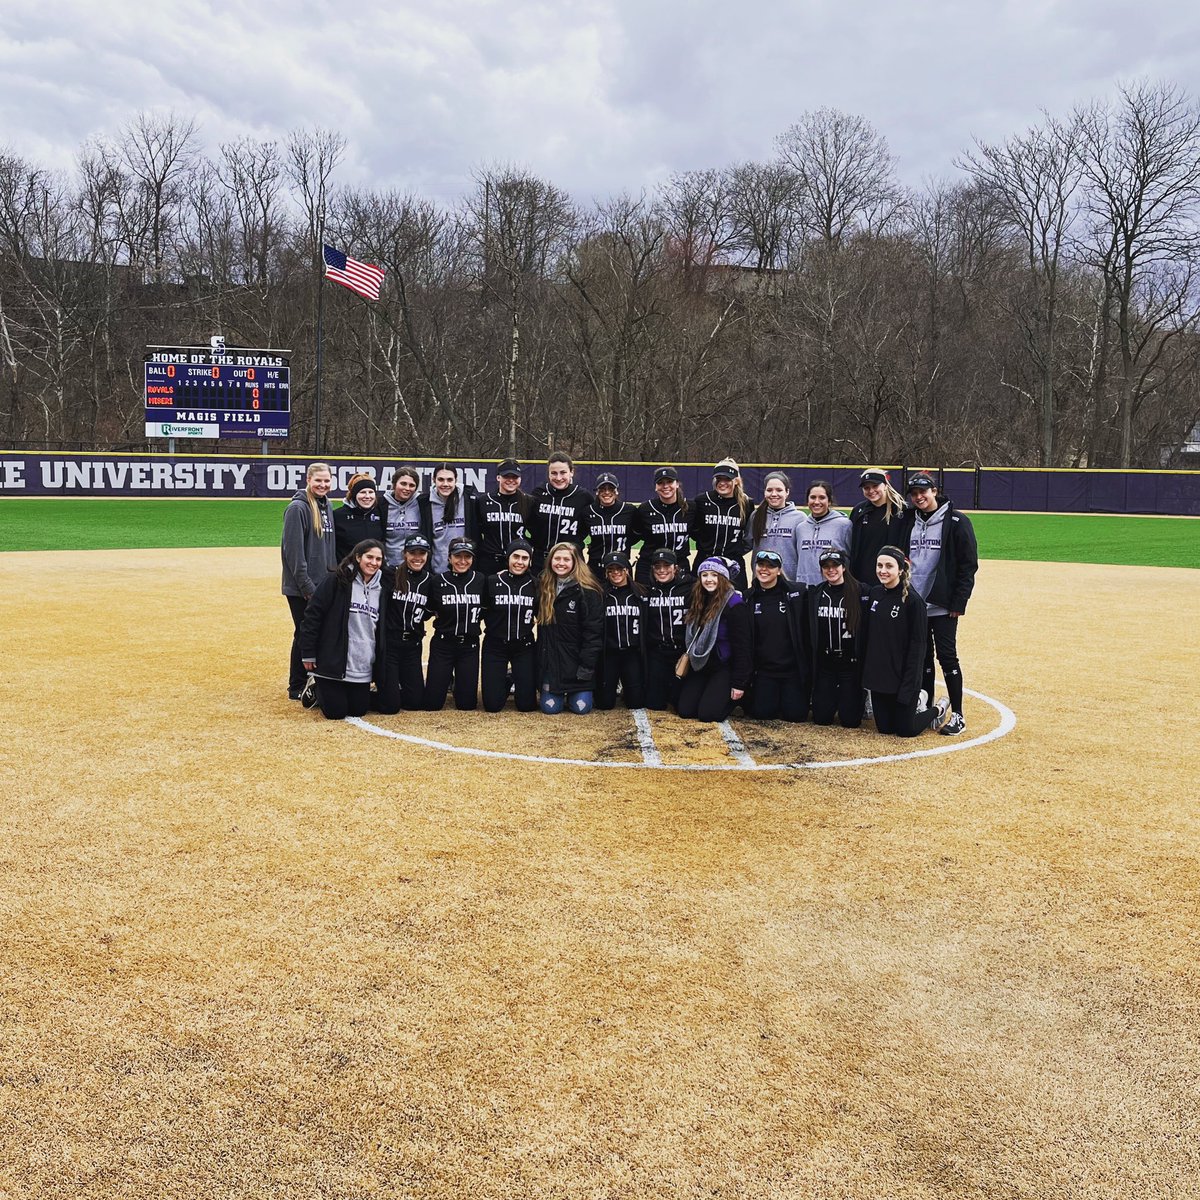 2 GOOD WINS WITH SOME AWESOME ALUMNI SUPPORT! GREAT DAY TO BE A ROYAL! 🤍💜🧹 #sundaysweep #alumnisupport #scrantonsoftball #royalstrong #letsgo #extrainnings